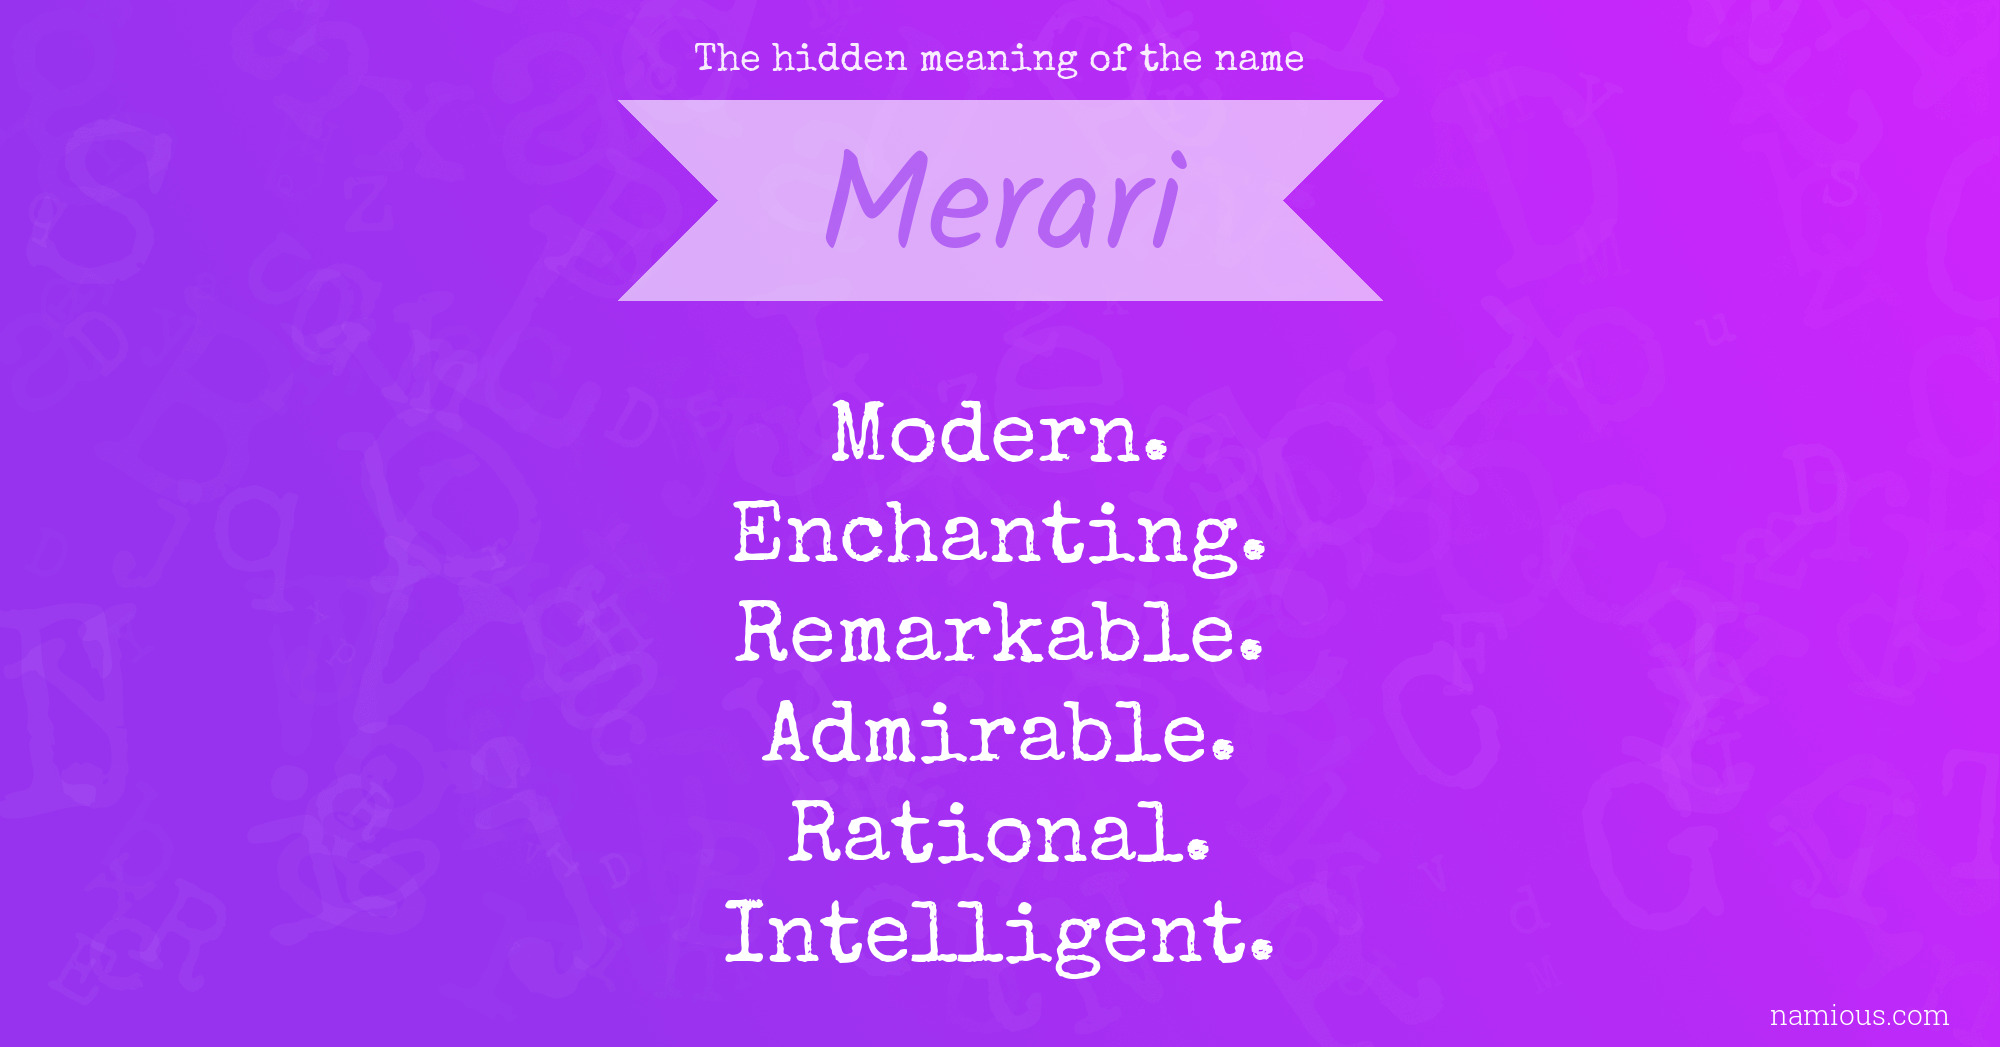 The hidden meaning of the name Merari